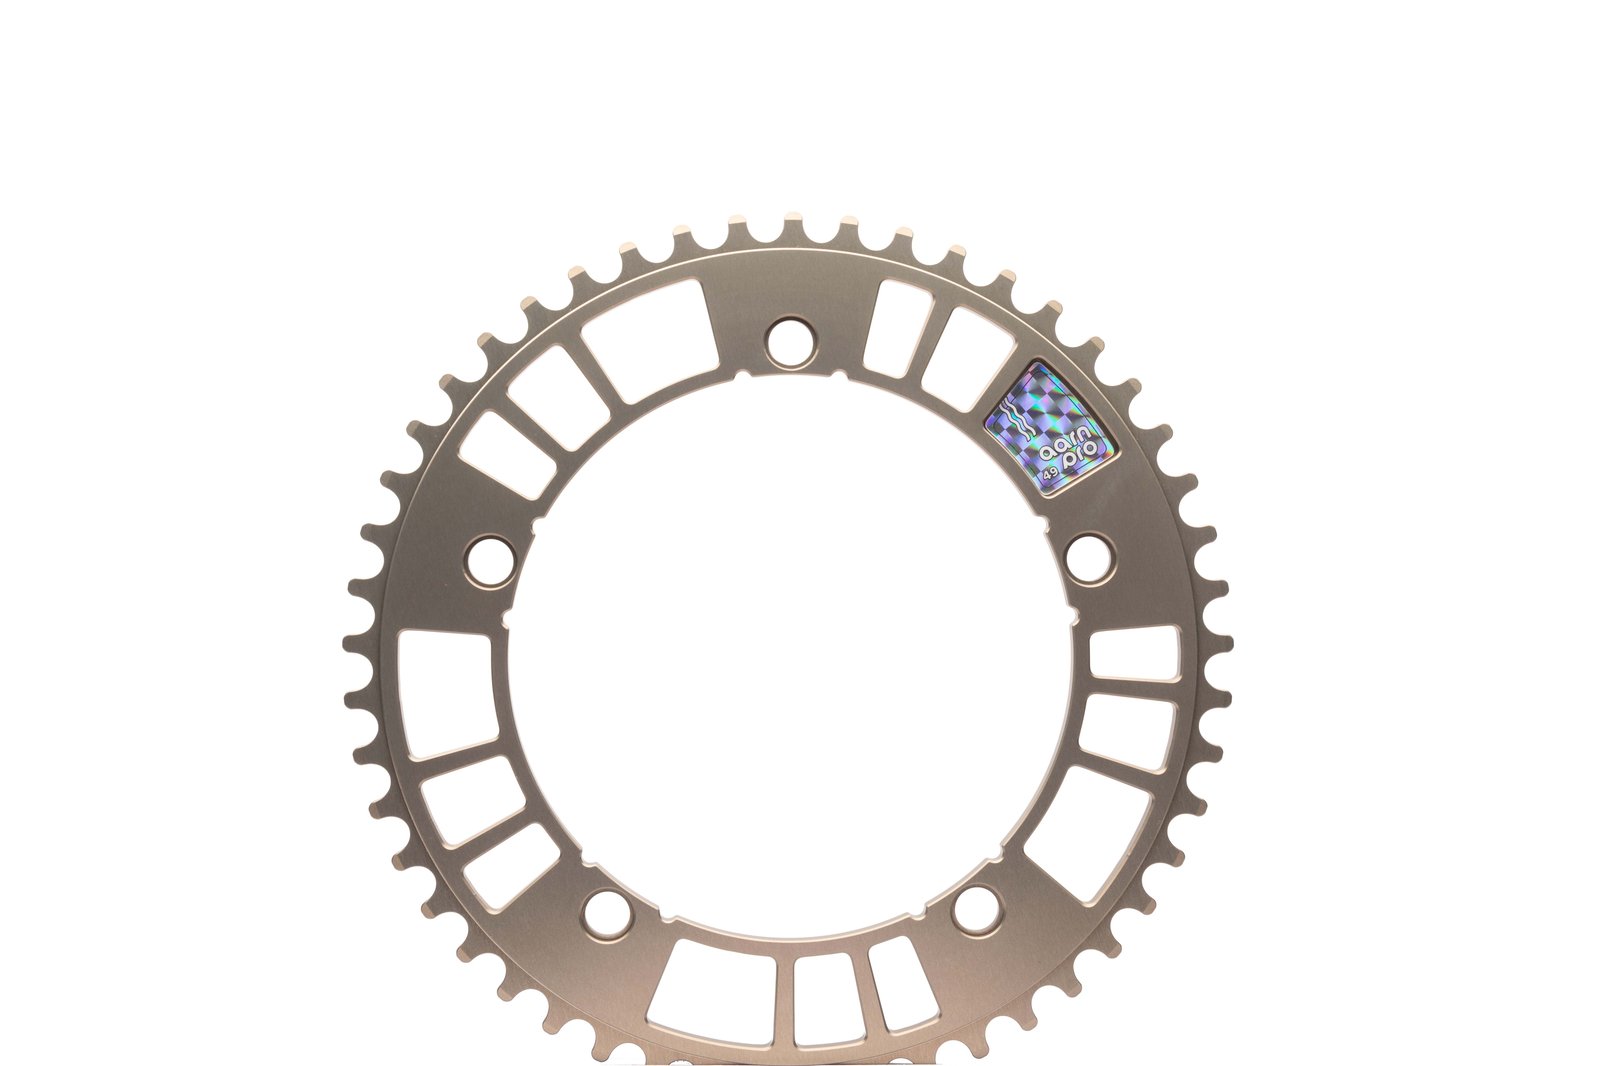 144#43/47/49/51/53/55 AARN PRO Anniversary Track Chainring  (144BCD//43/47/49/51/53/55-Tooth)